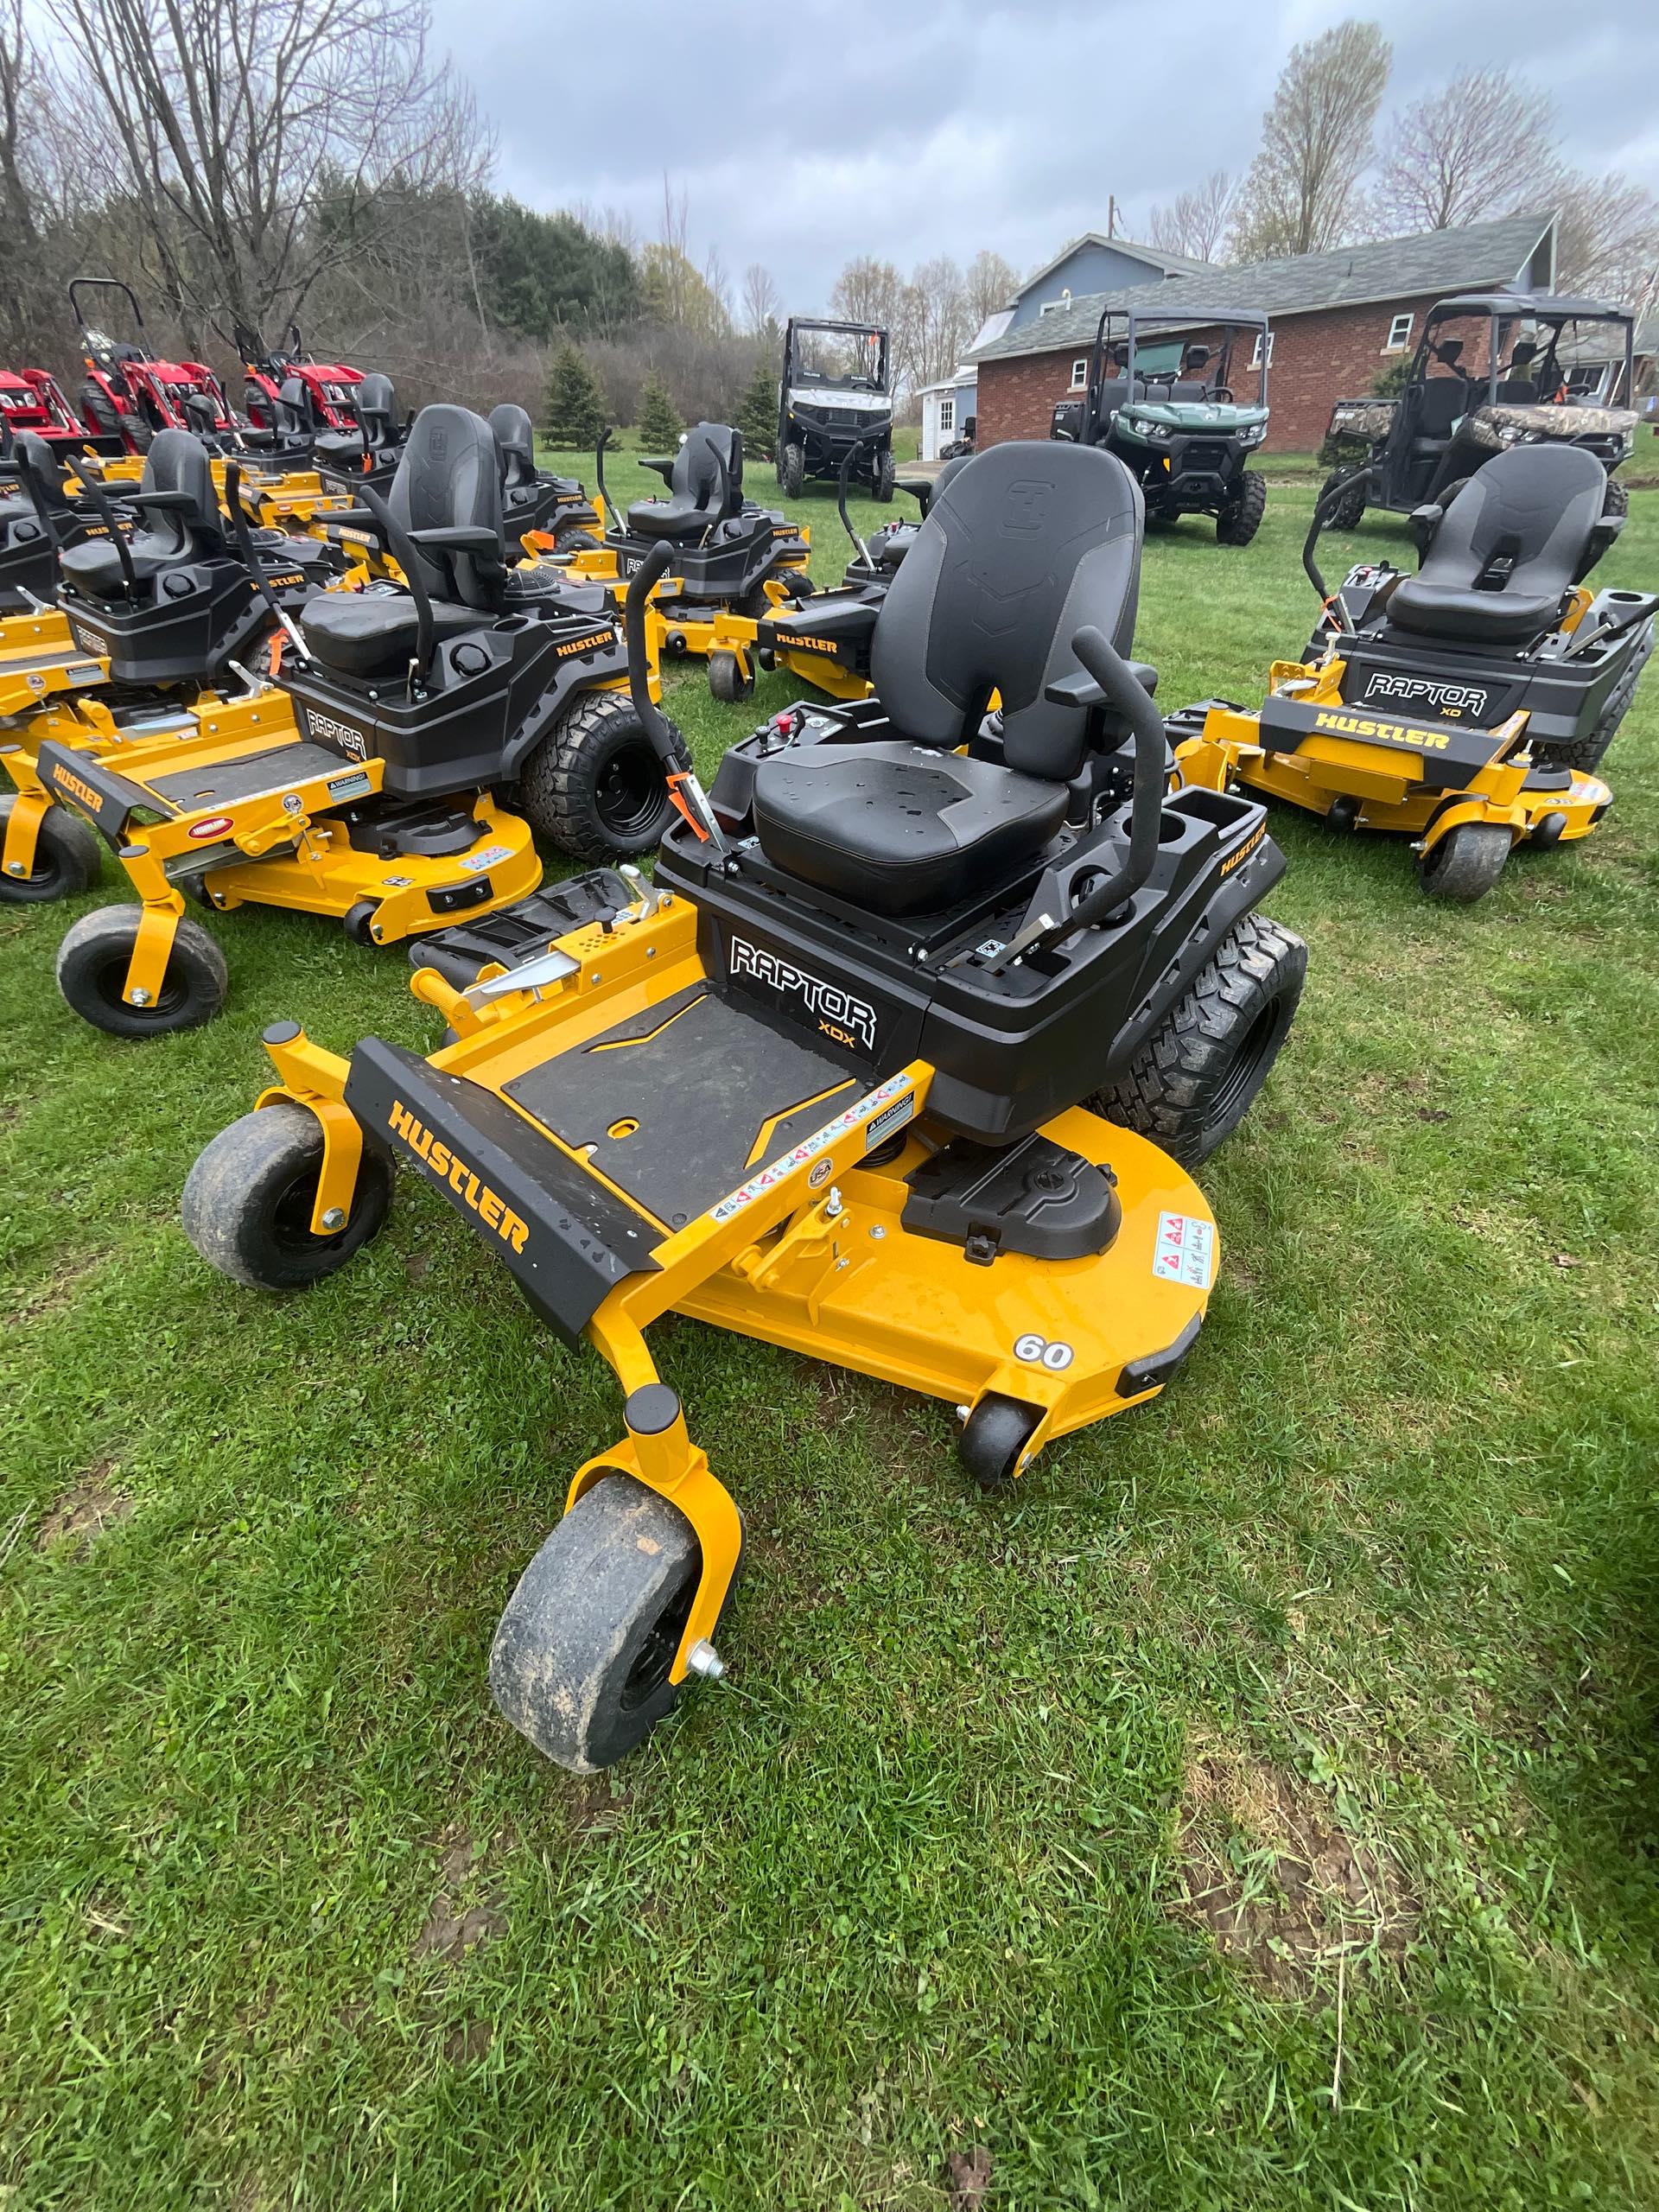 2022 Hustler Residential Mowers Residential Mowers Raptor XDX 60 at Leisure Time Powersports of Corry